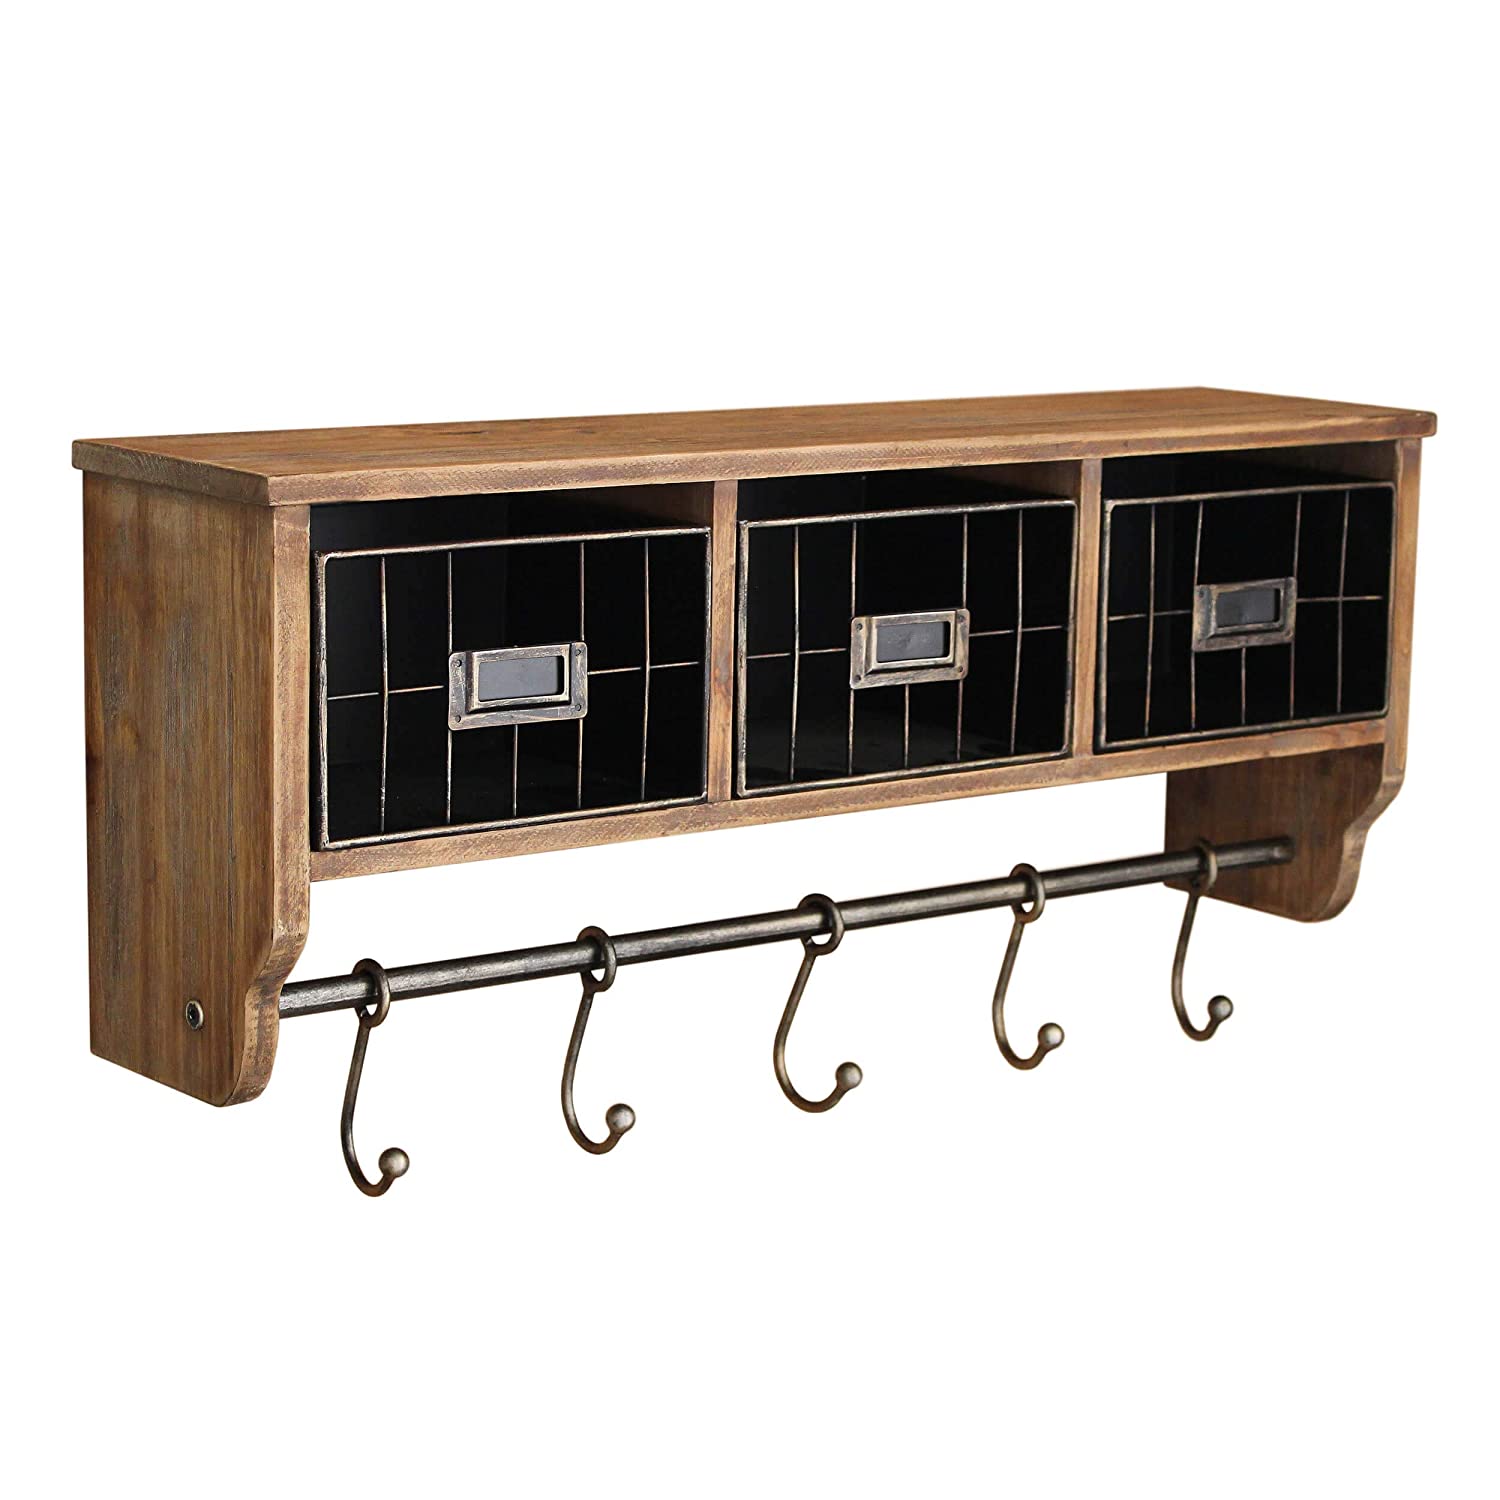 HBCY Creations Industrial Mounted Coat Rack & Shelving